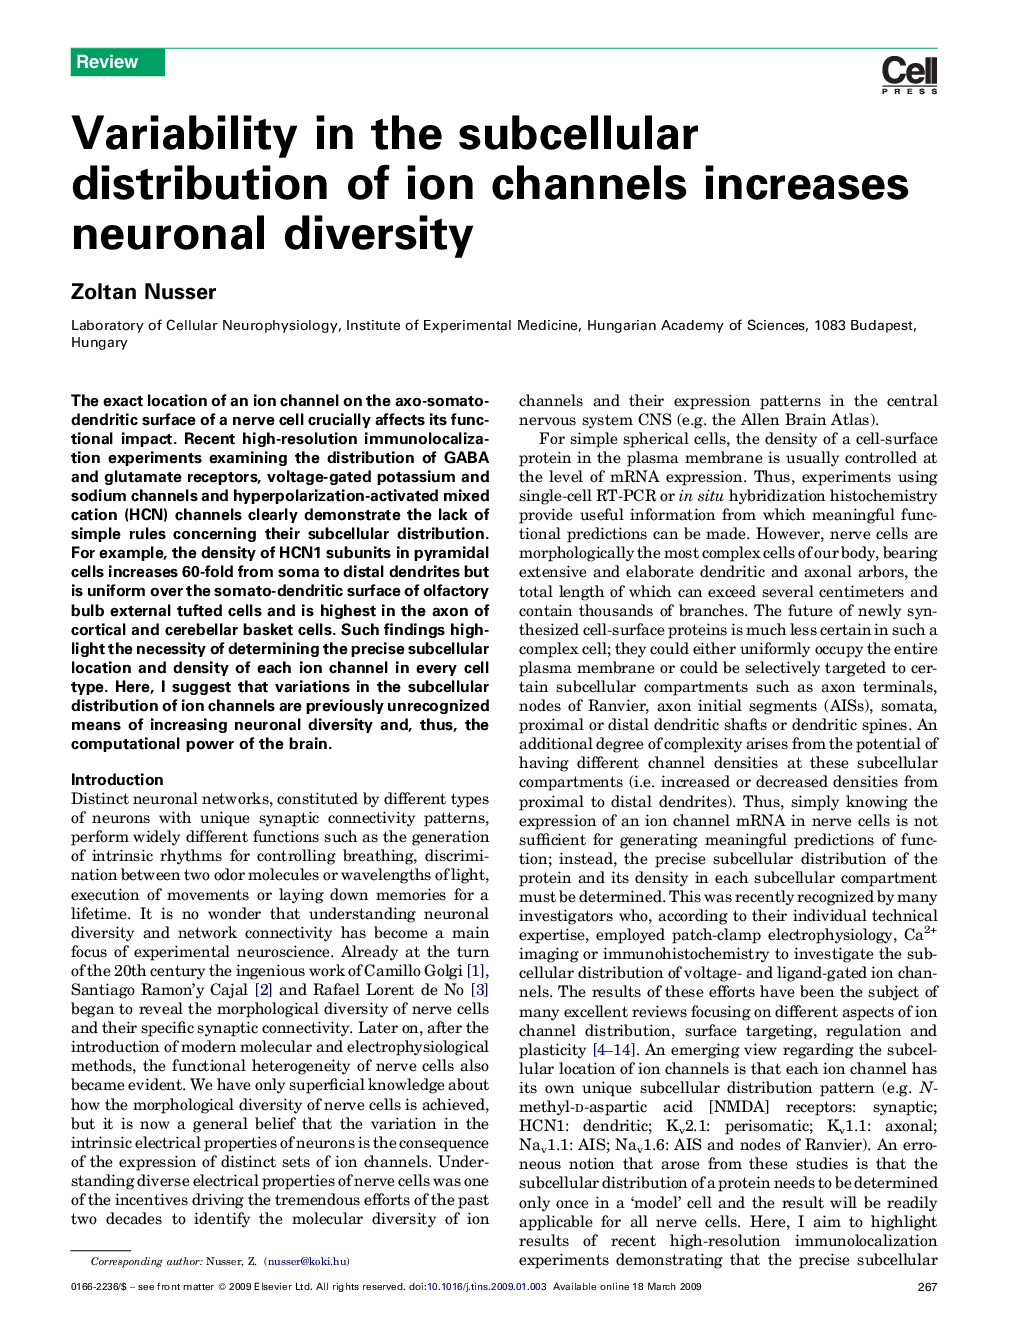 Variability in the subcellular distribution of ion channels increases neuronal diversity